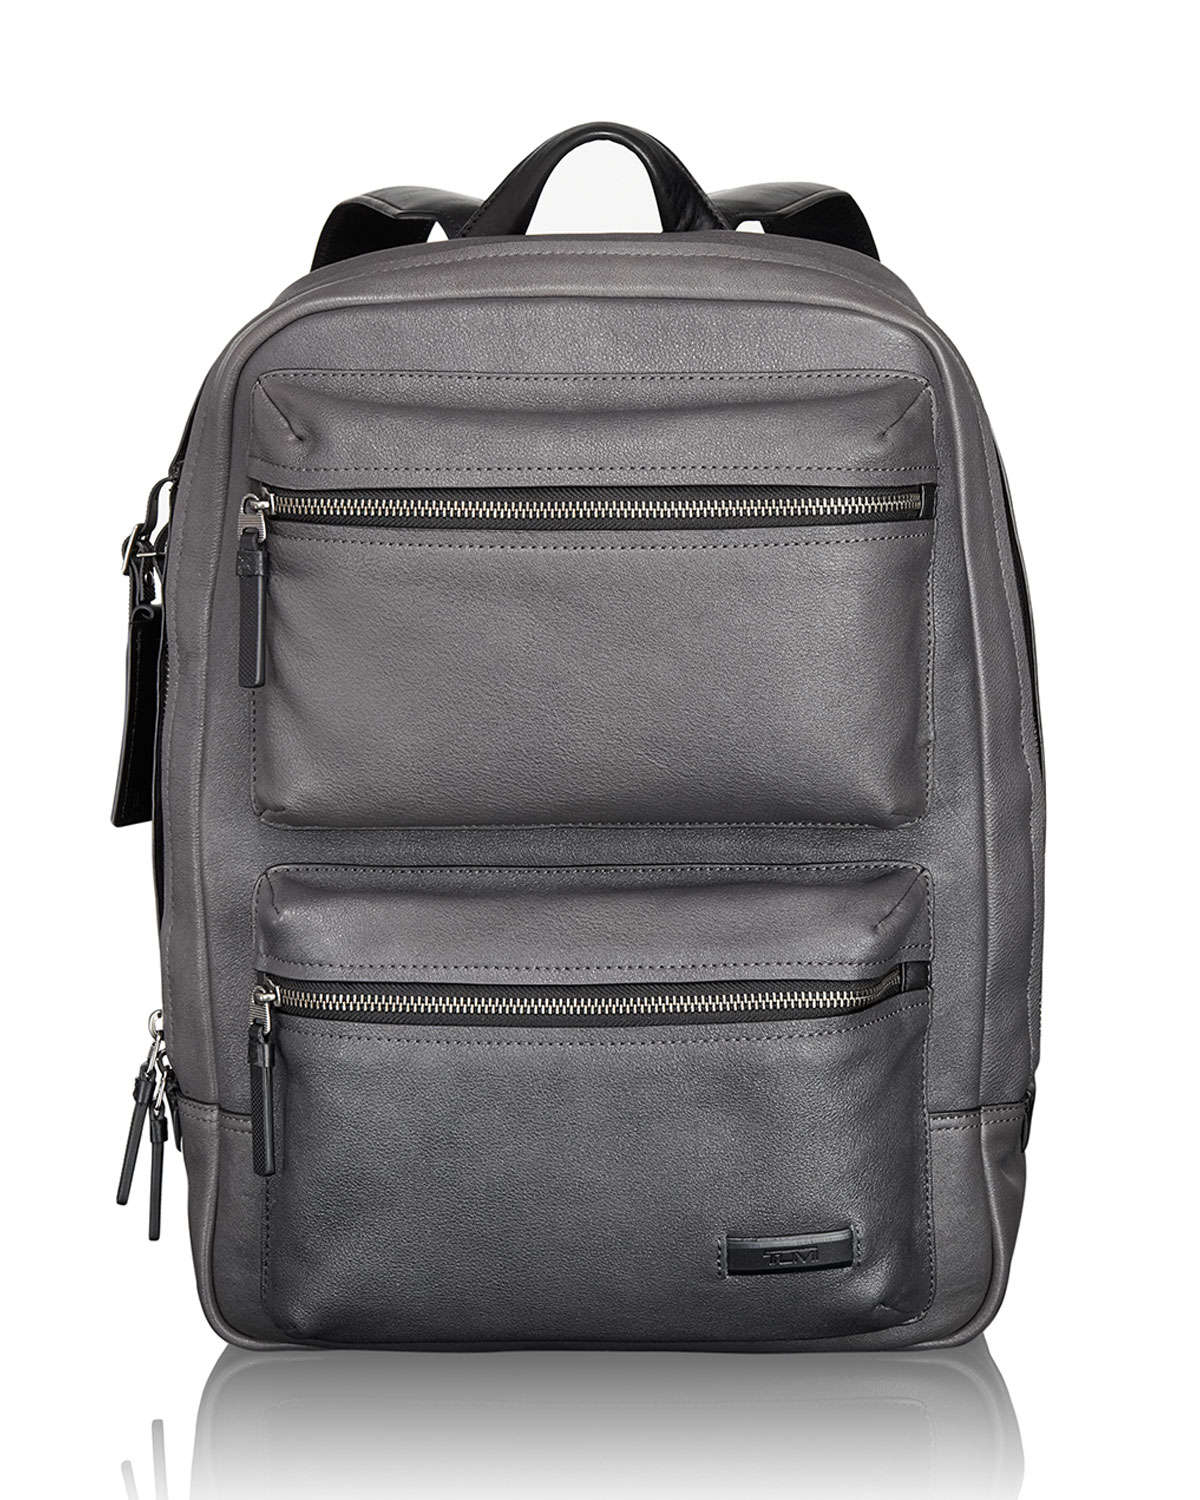 Lyst - Tumi Mission Iron Bryant Leather Backpack in Gray for Men